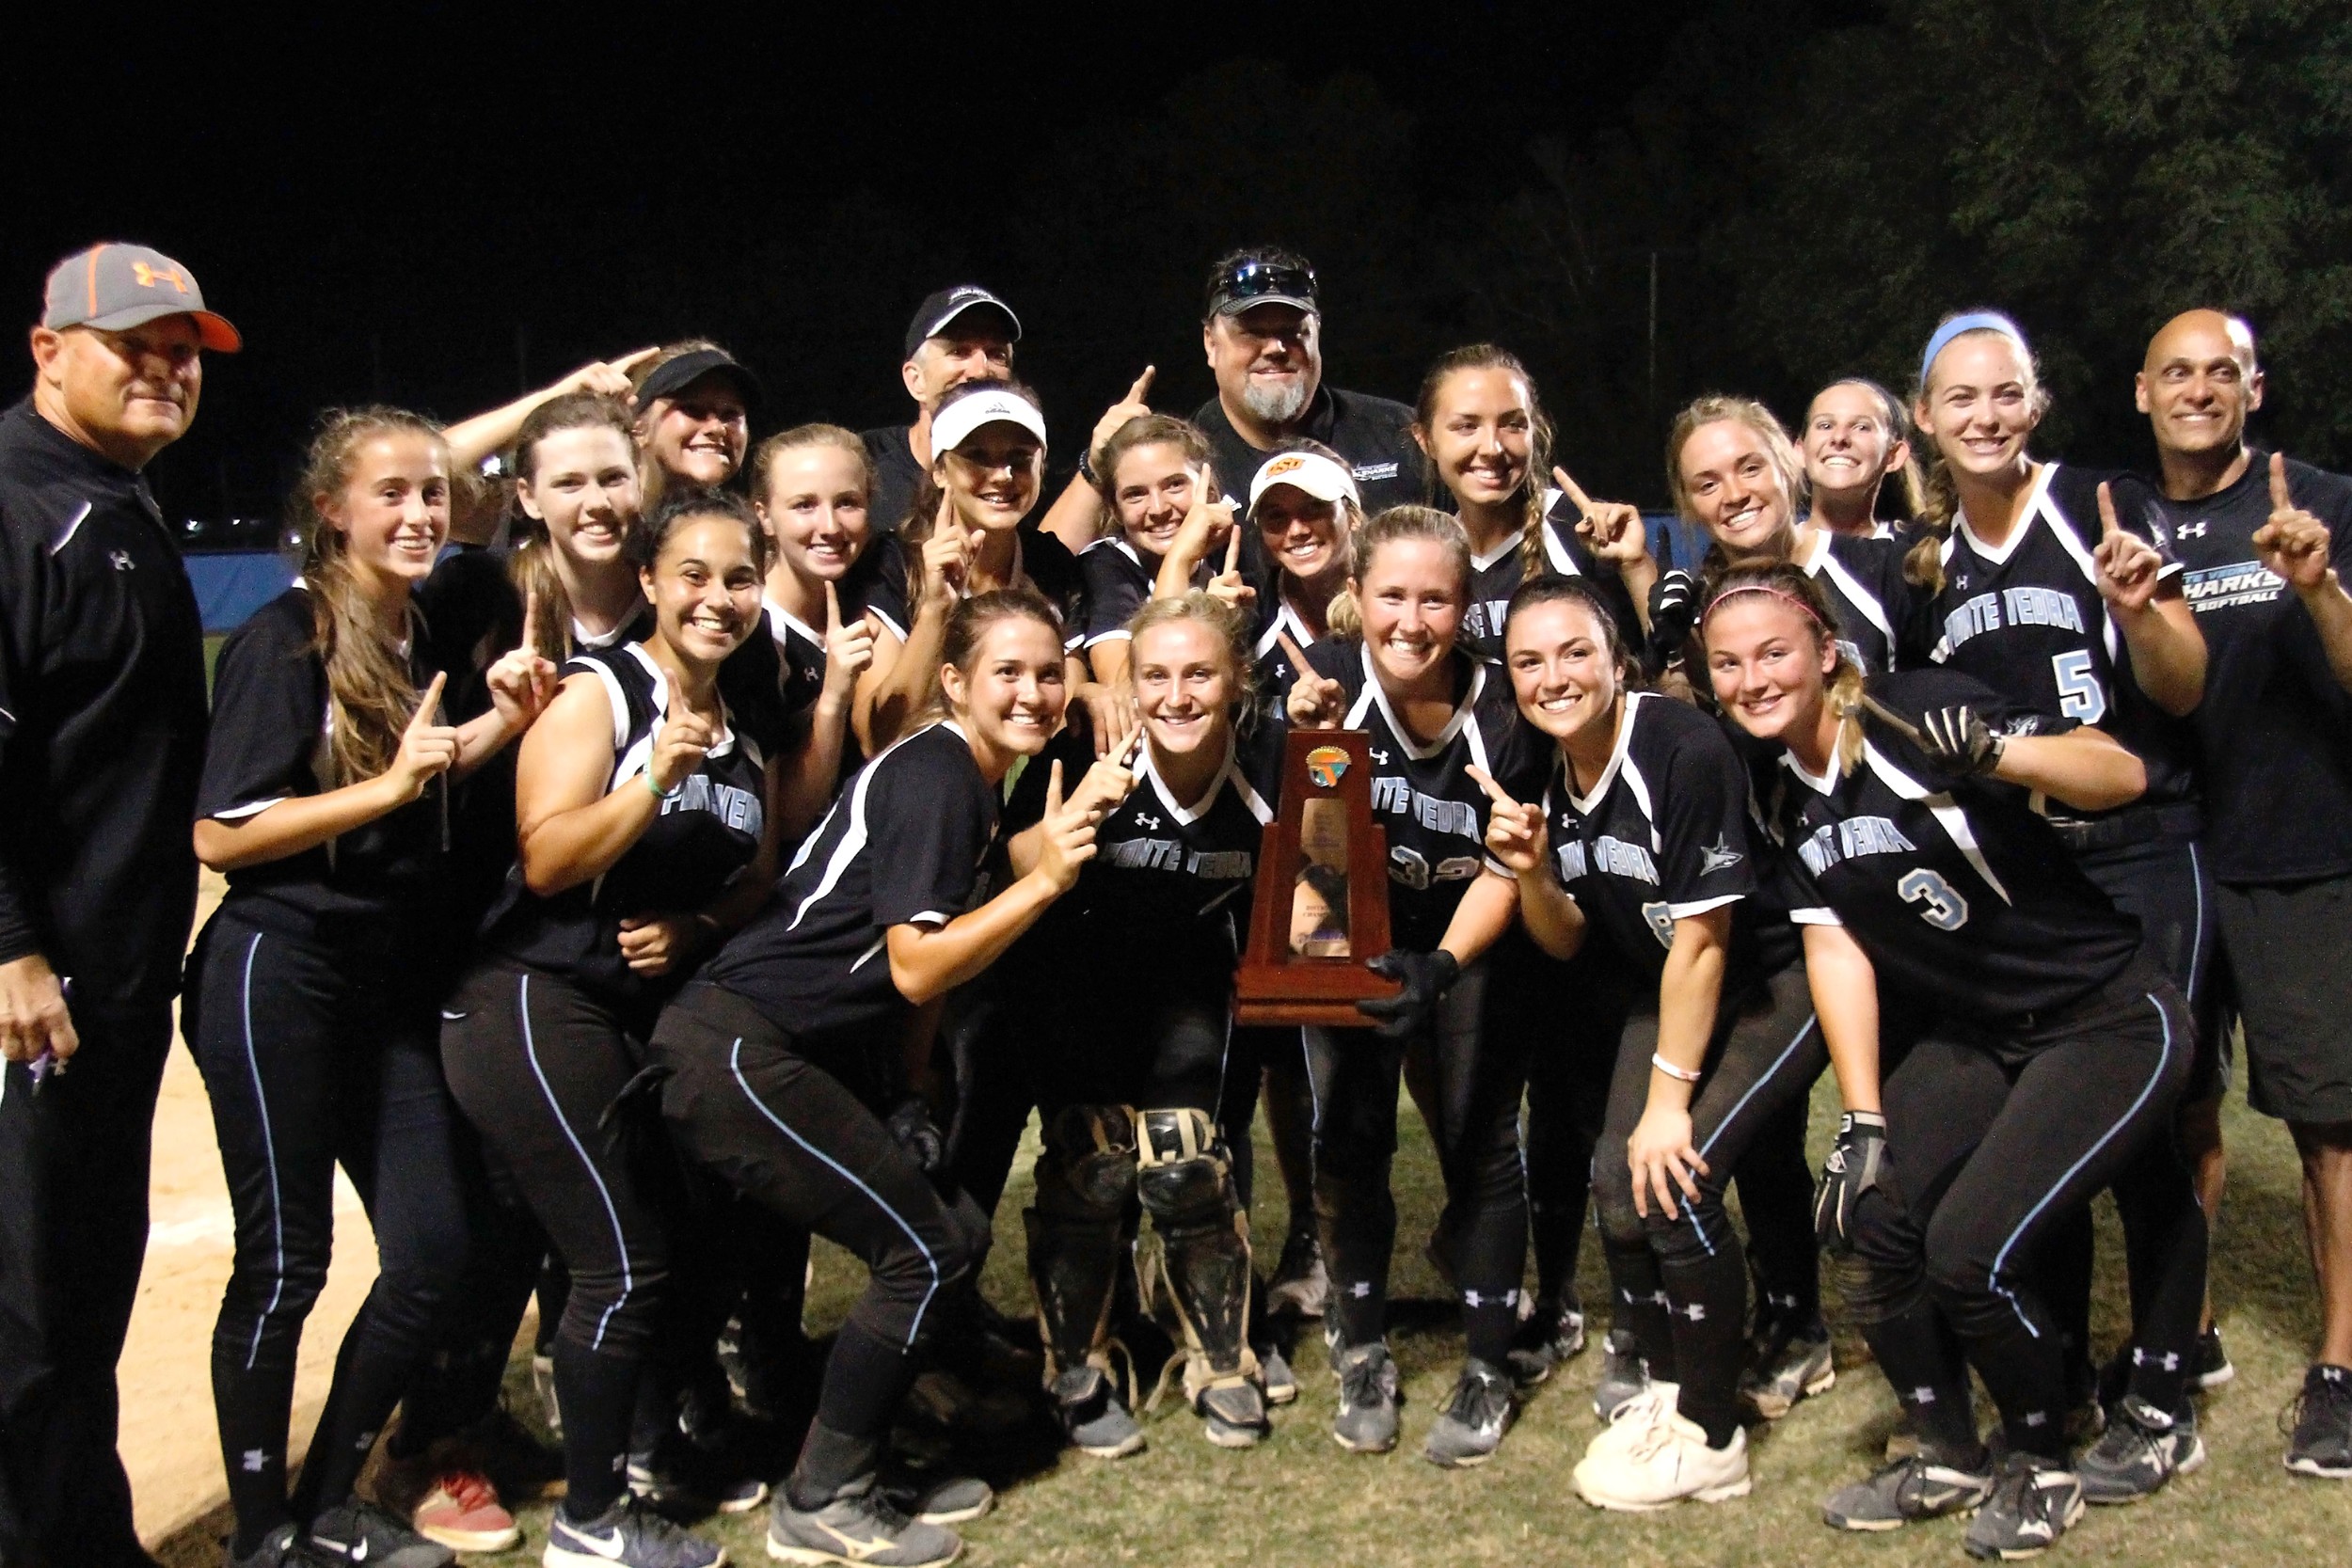 The victorious Sharks celebrate after winning the Class 6A District 4 title.